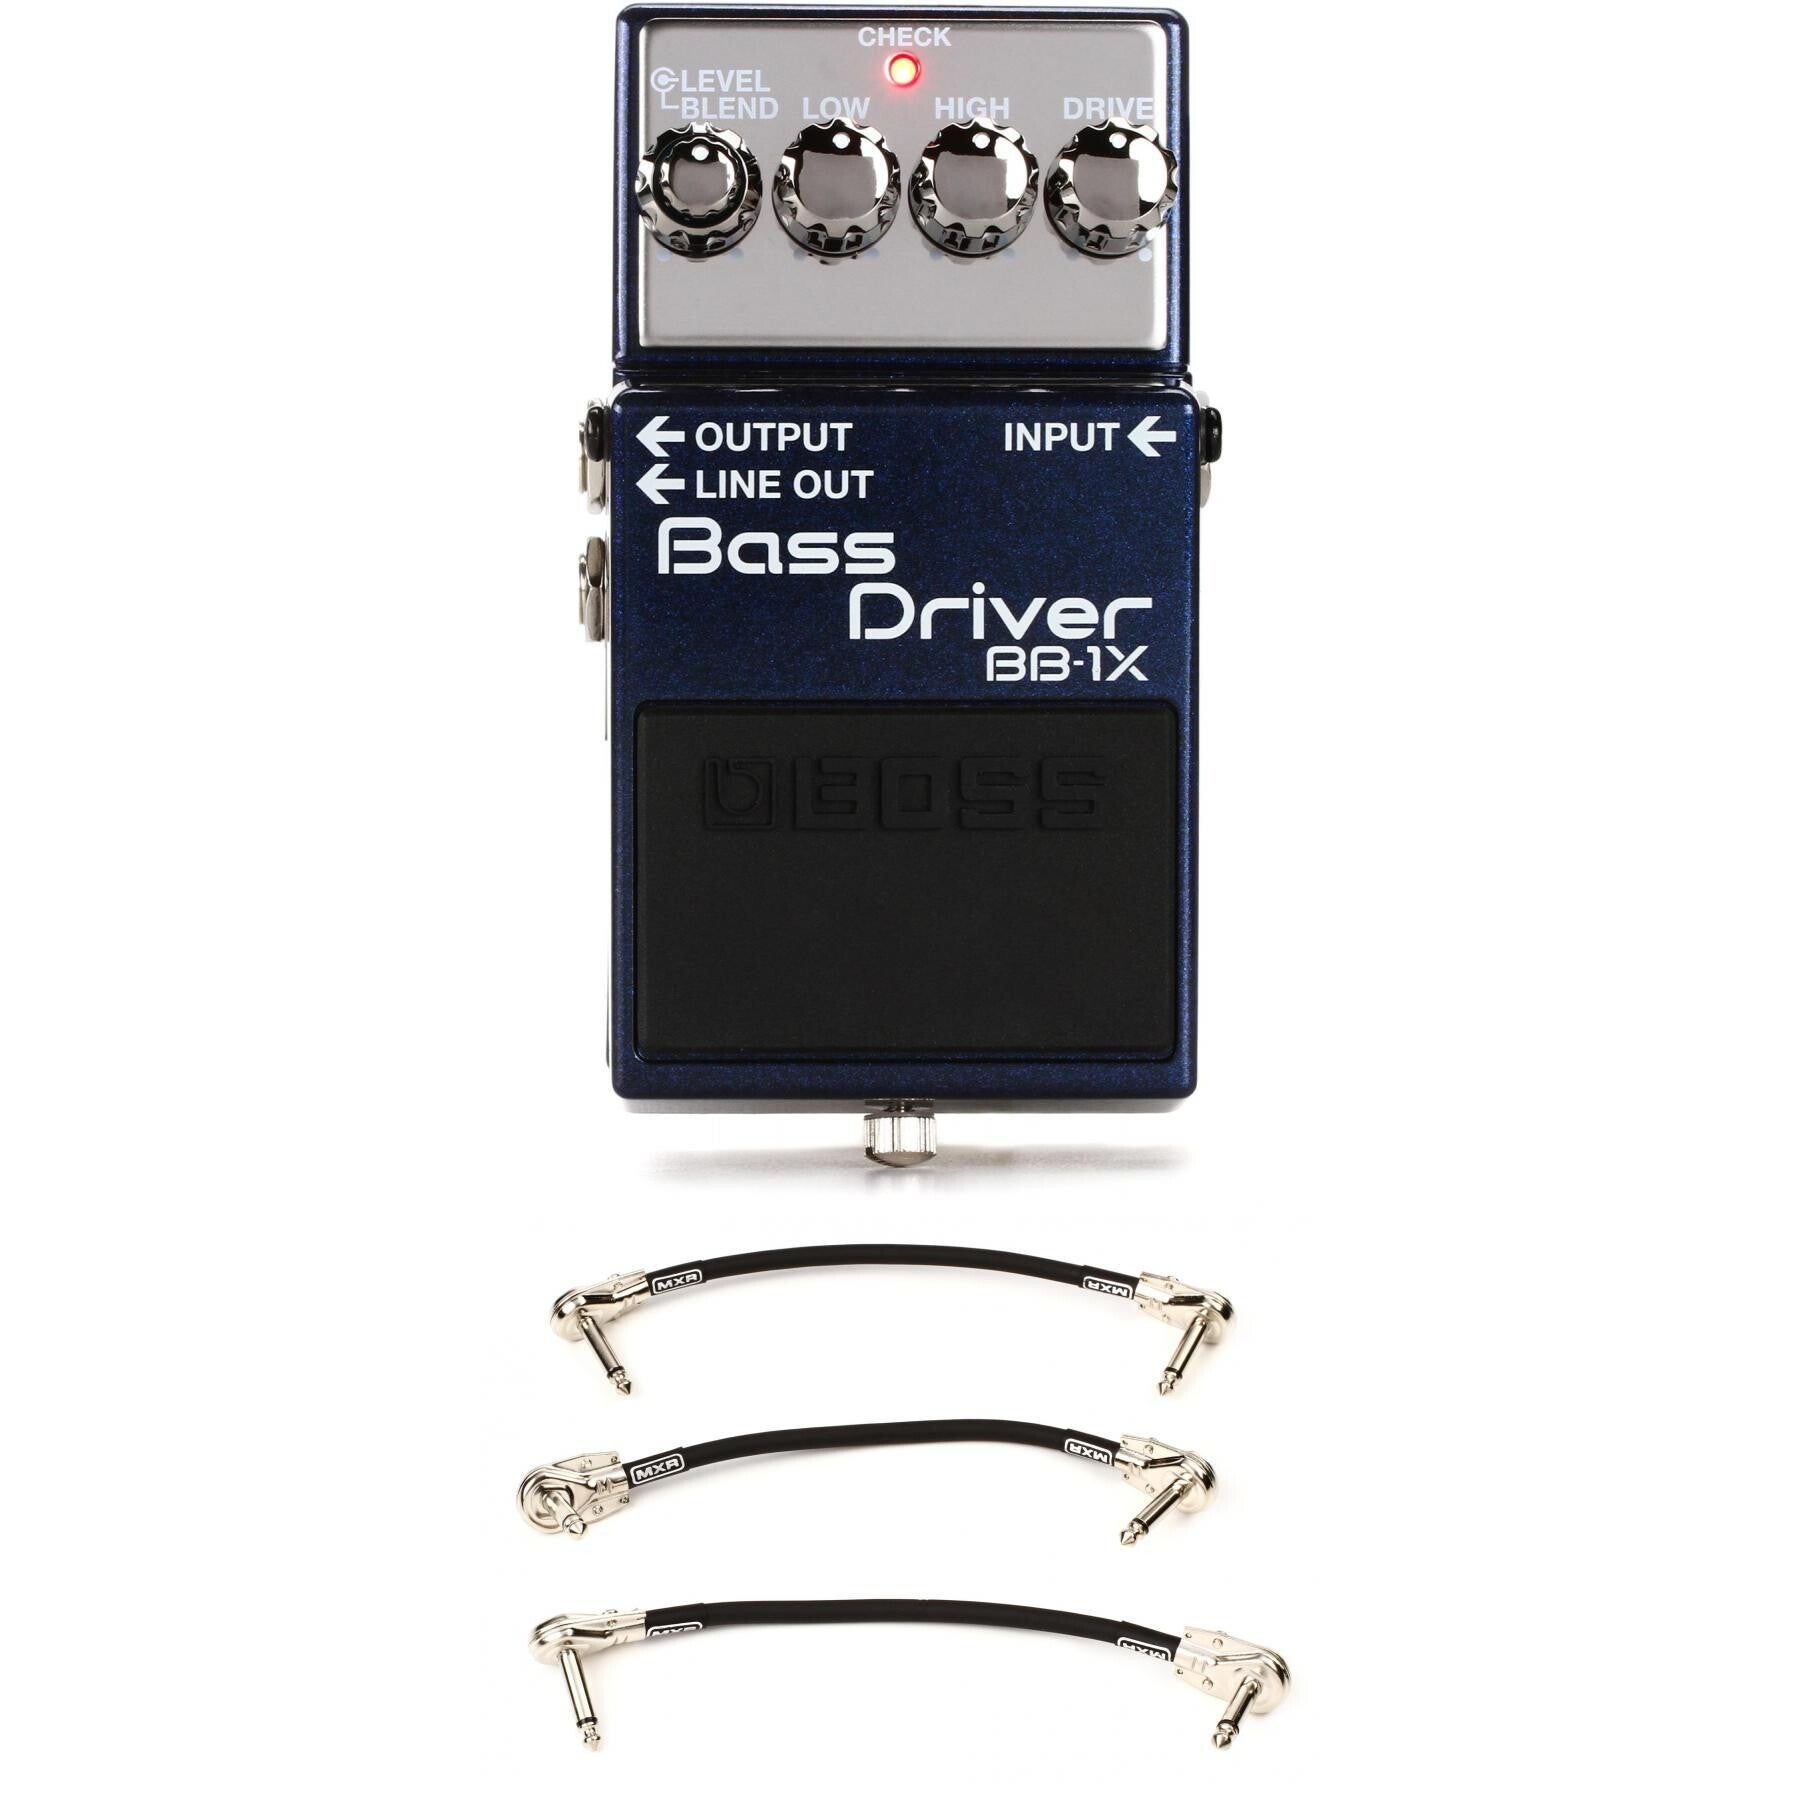 Boss BB-1X Bass Driver Pedal with 3 Patch Cables